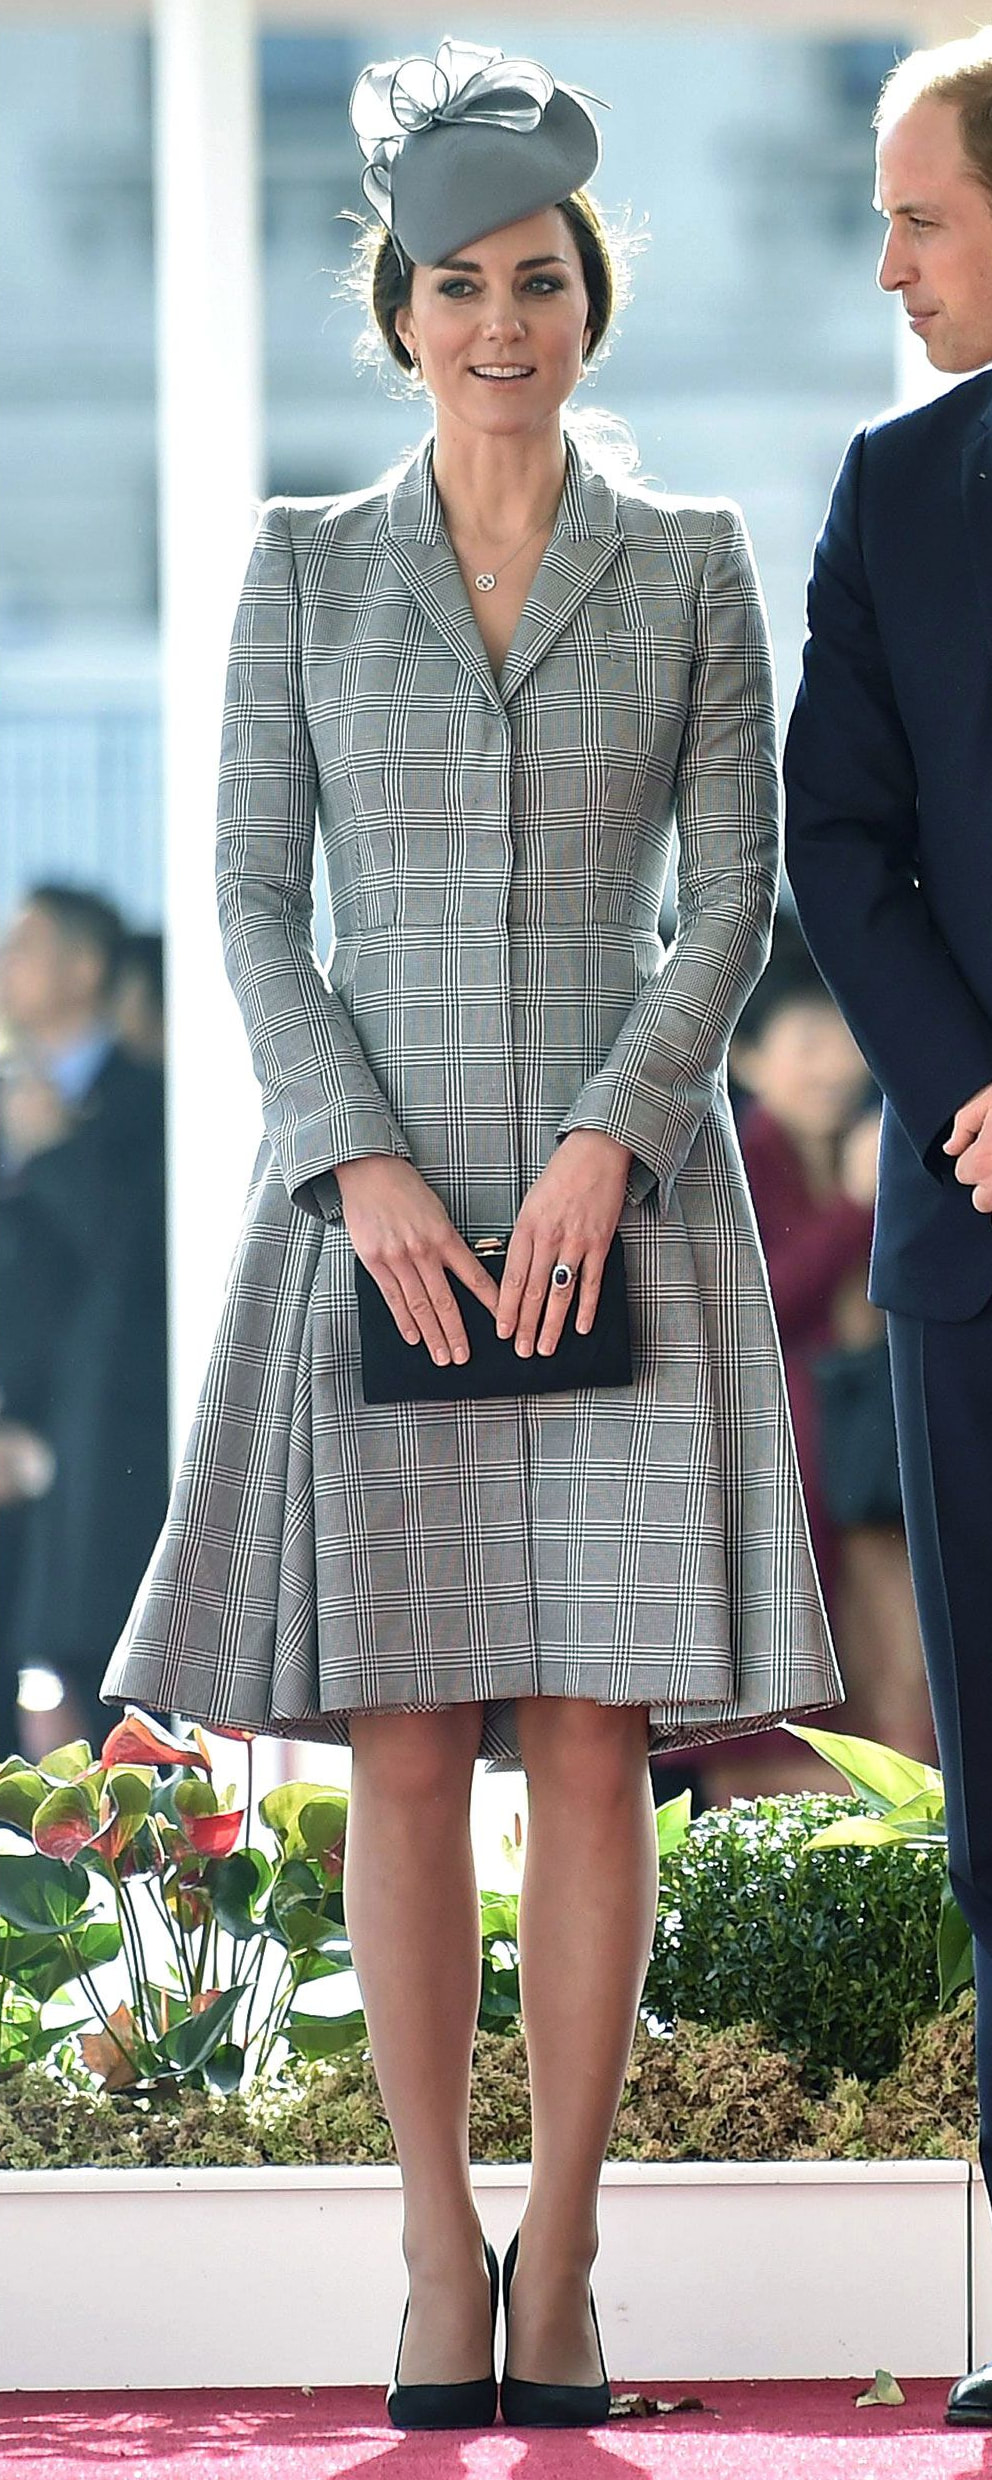 Jenny Packham Roxy Clutch in Black Suede as seen on Kate Middleton, the Duchess of Cambridge.